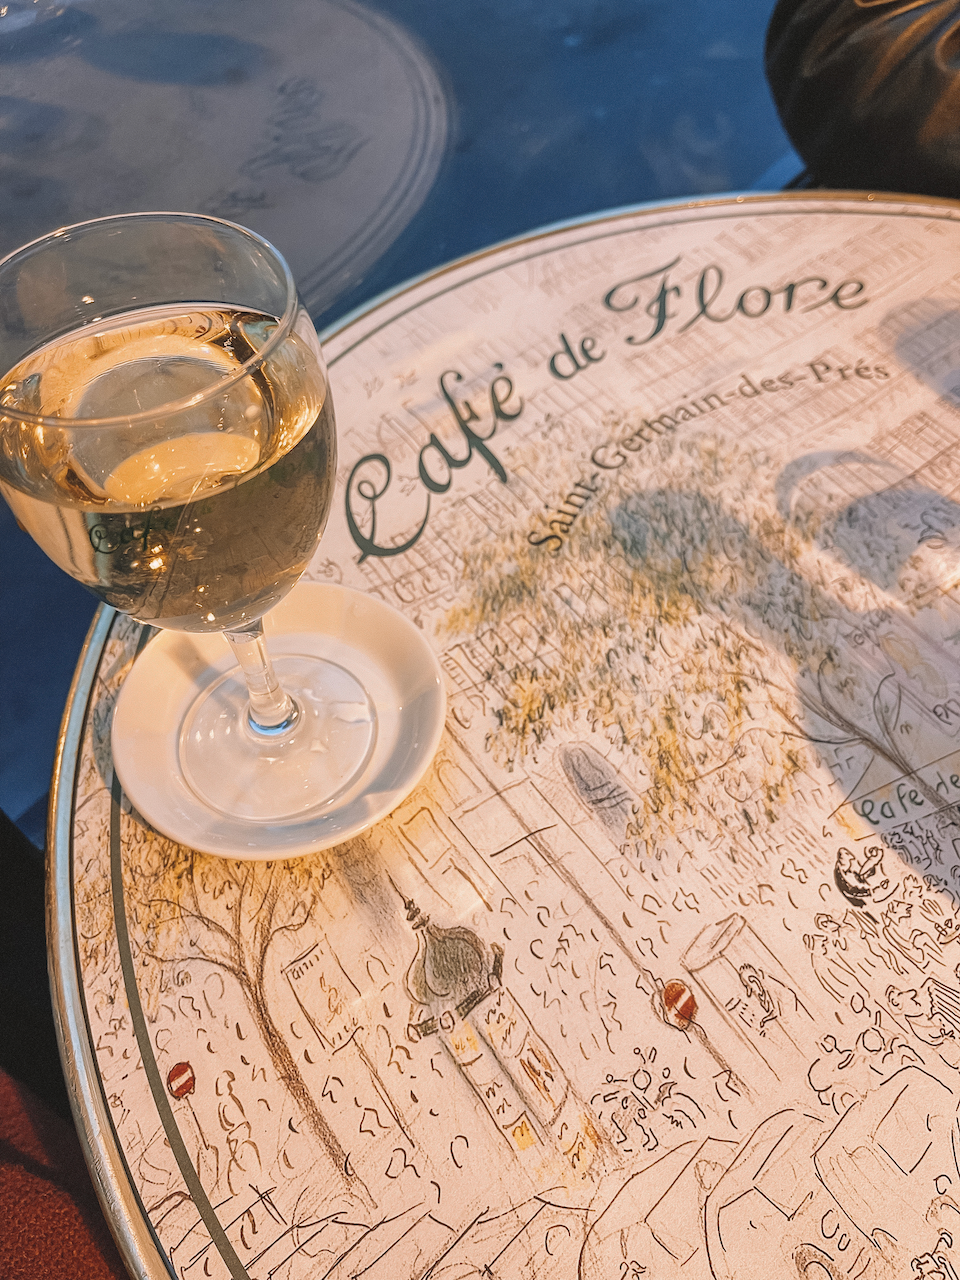 Cafe de Flore table cover with glass of wine - Paris - France